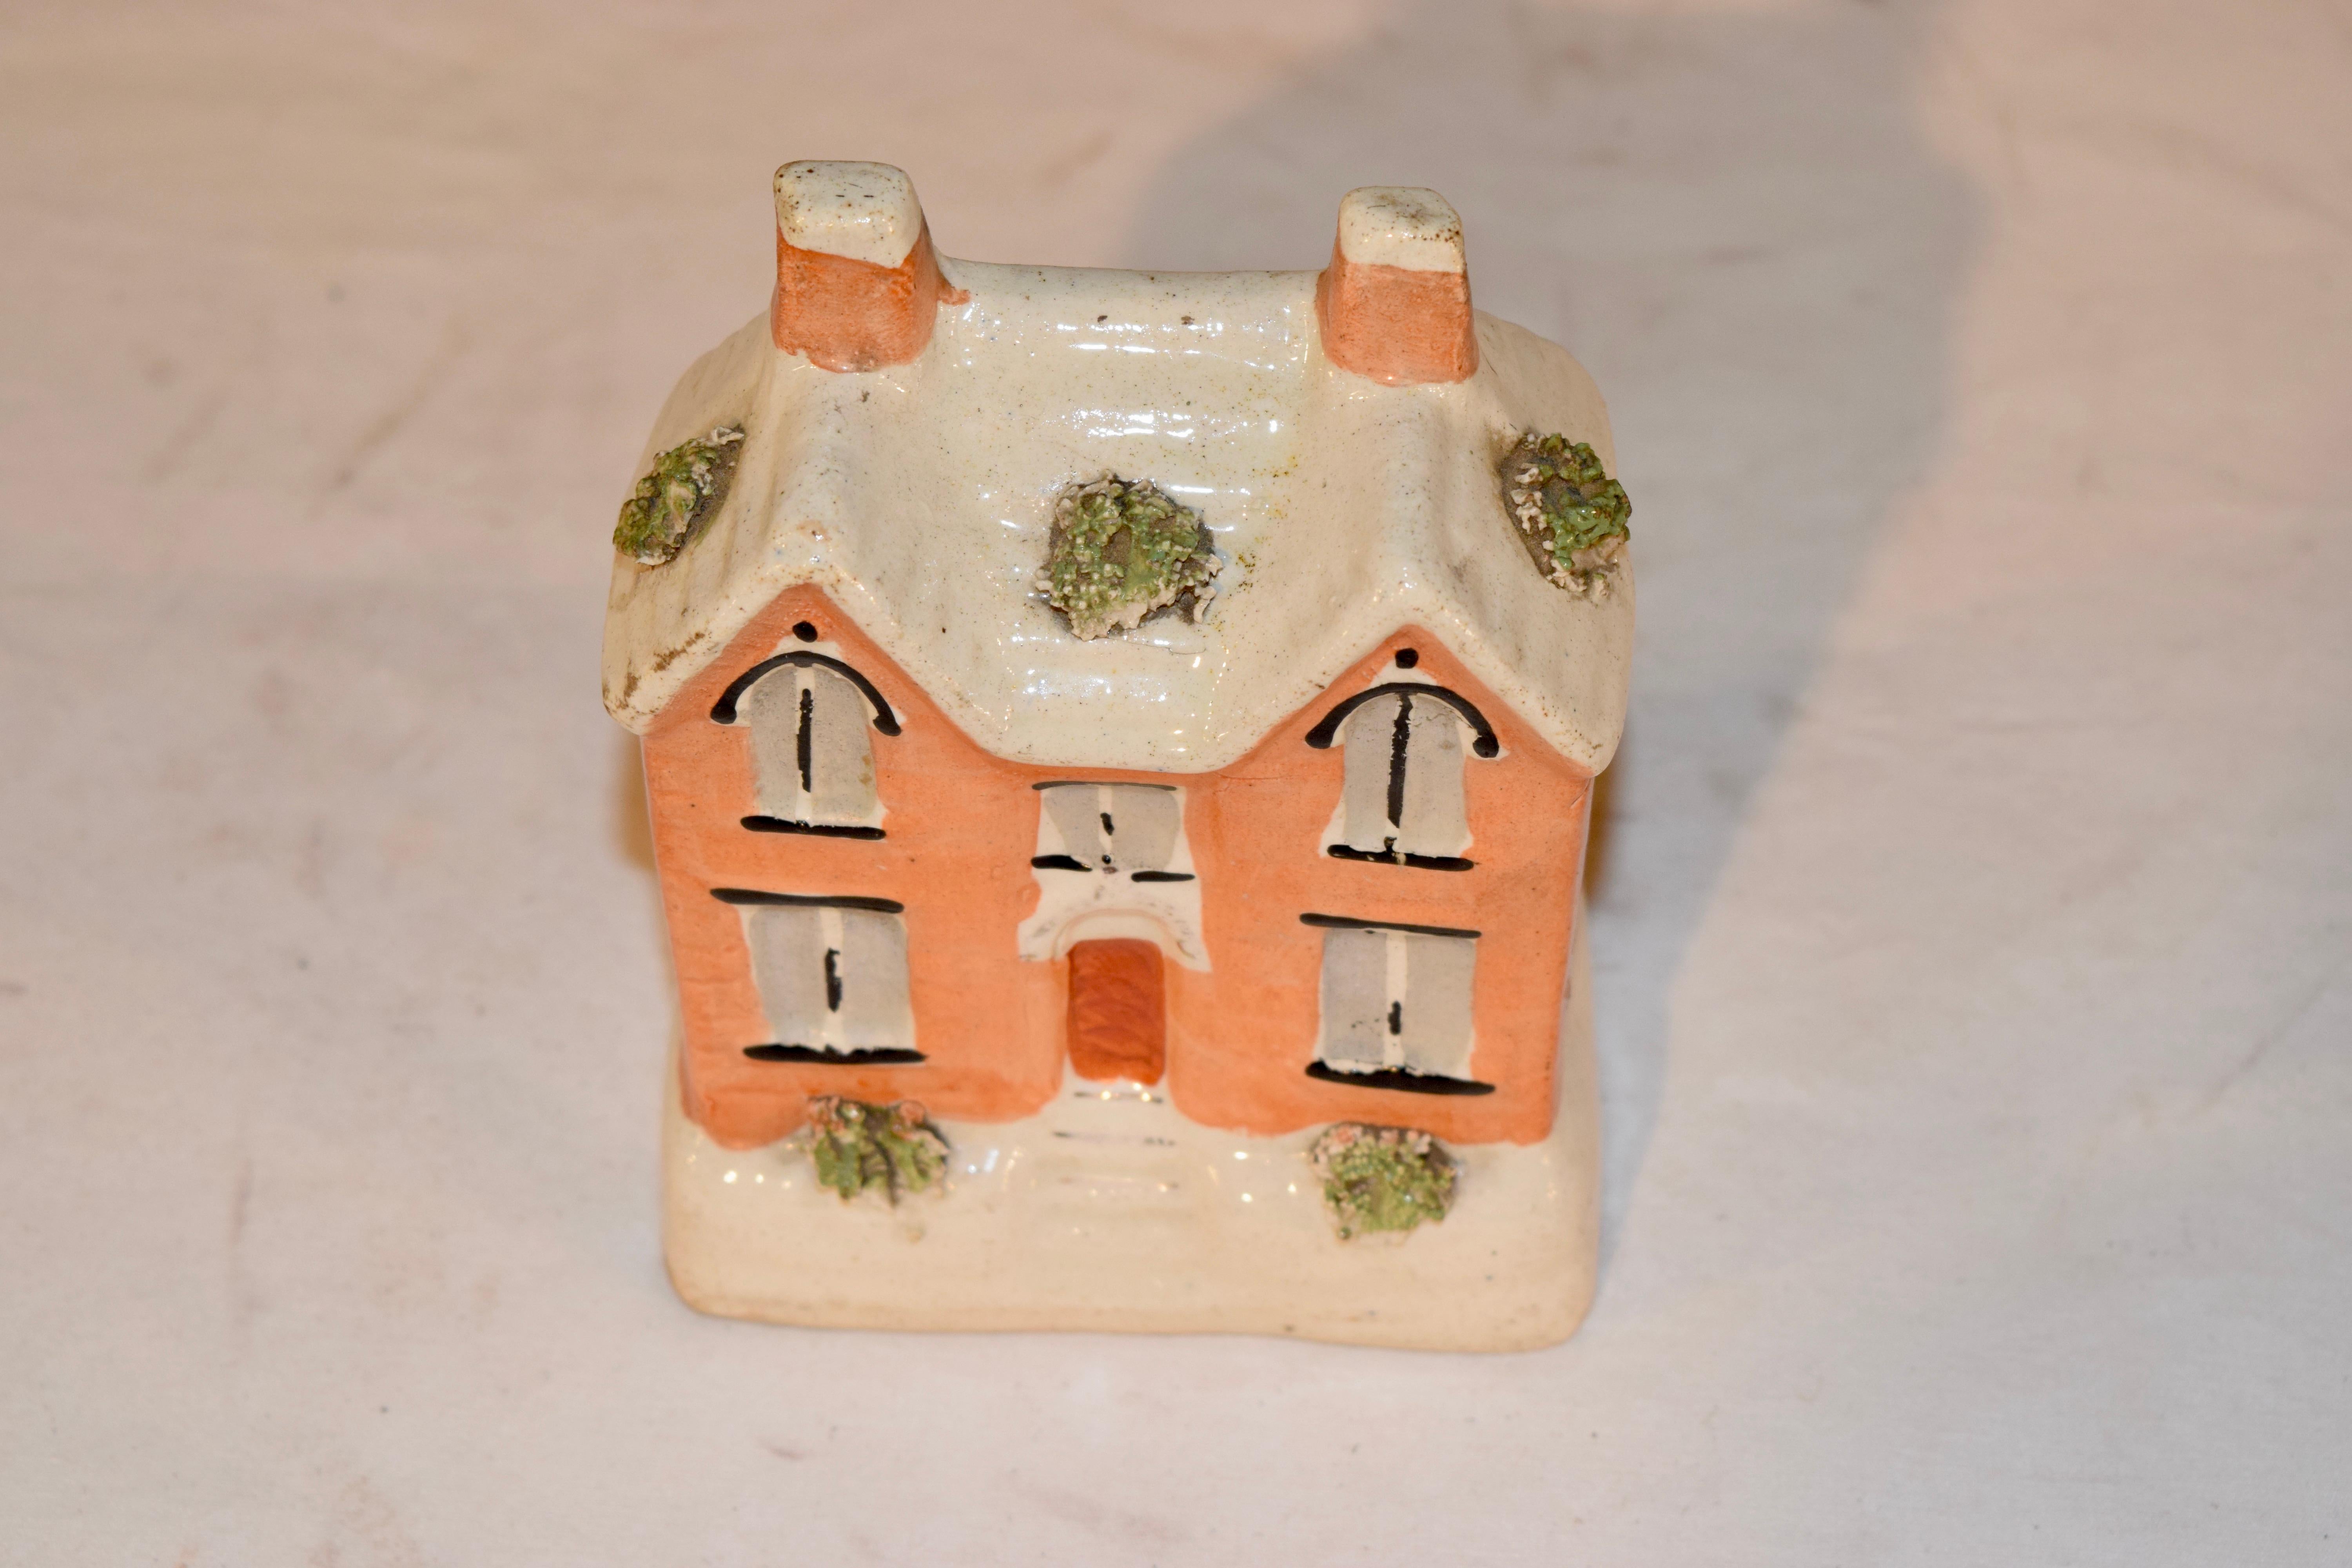 19th century Staffordshire pottery penny bank from England in the form of a cottage with flocked details. The coin slot has a few nicks from age and use.